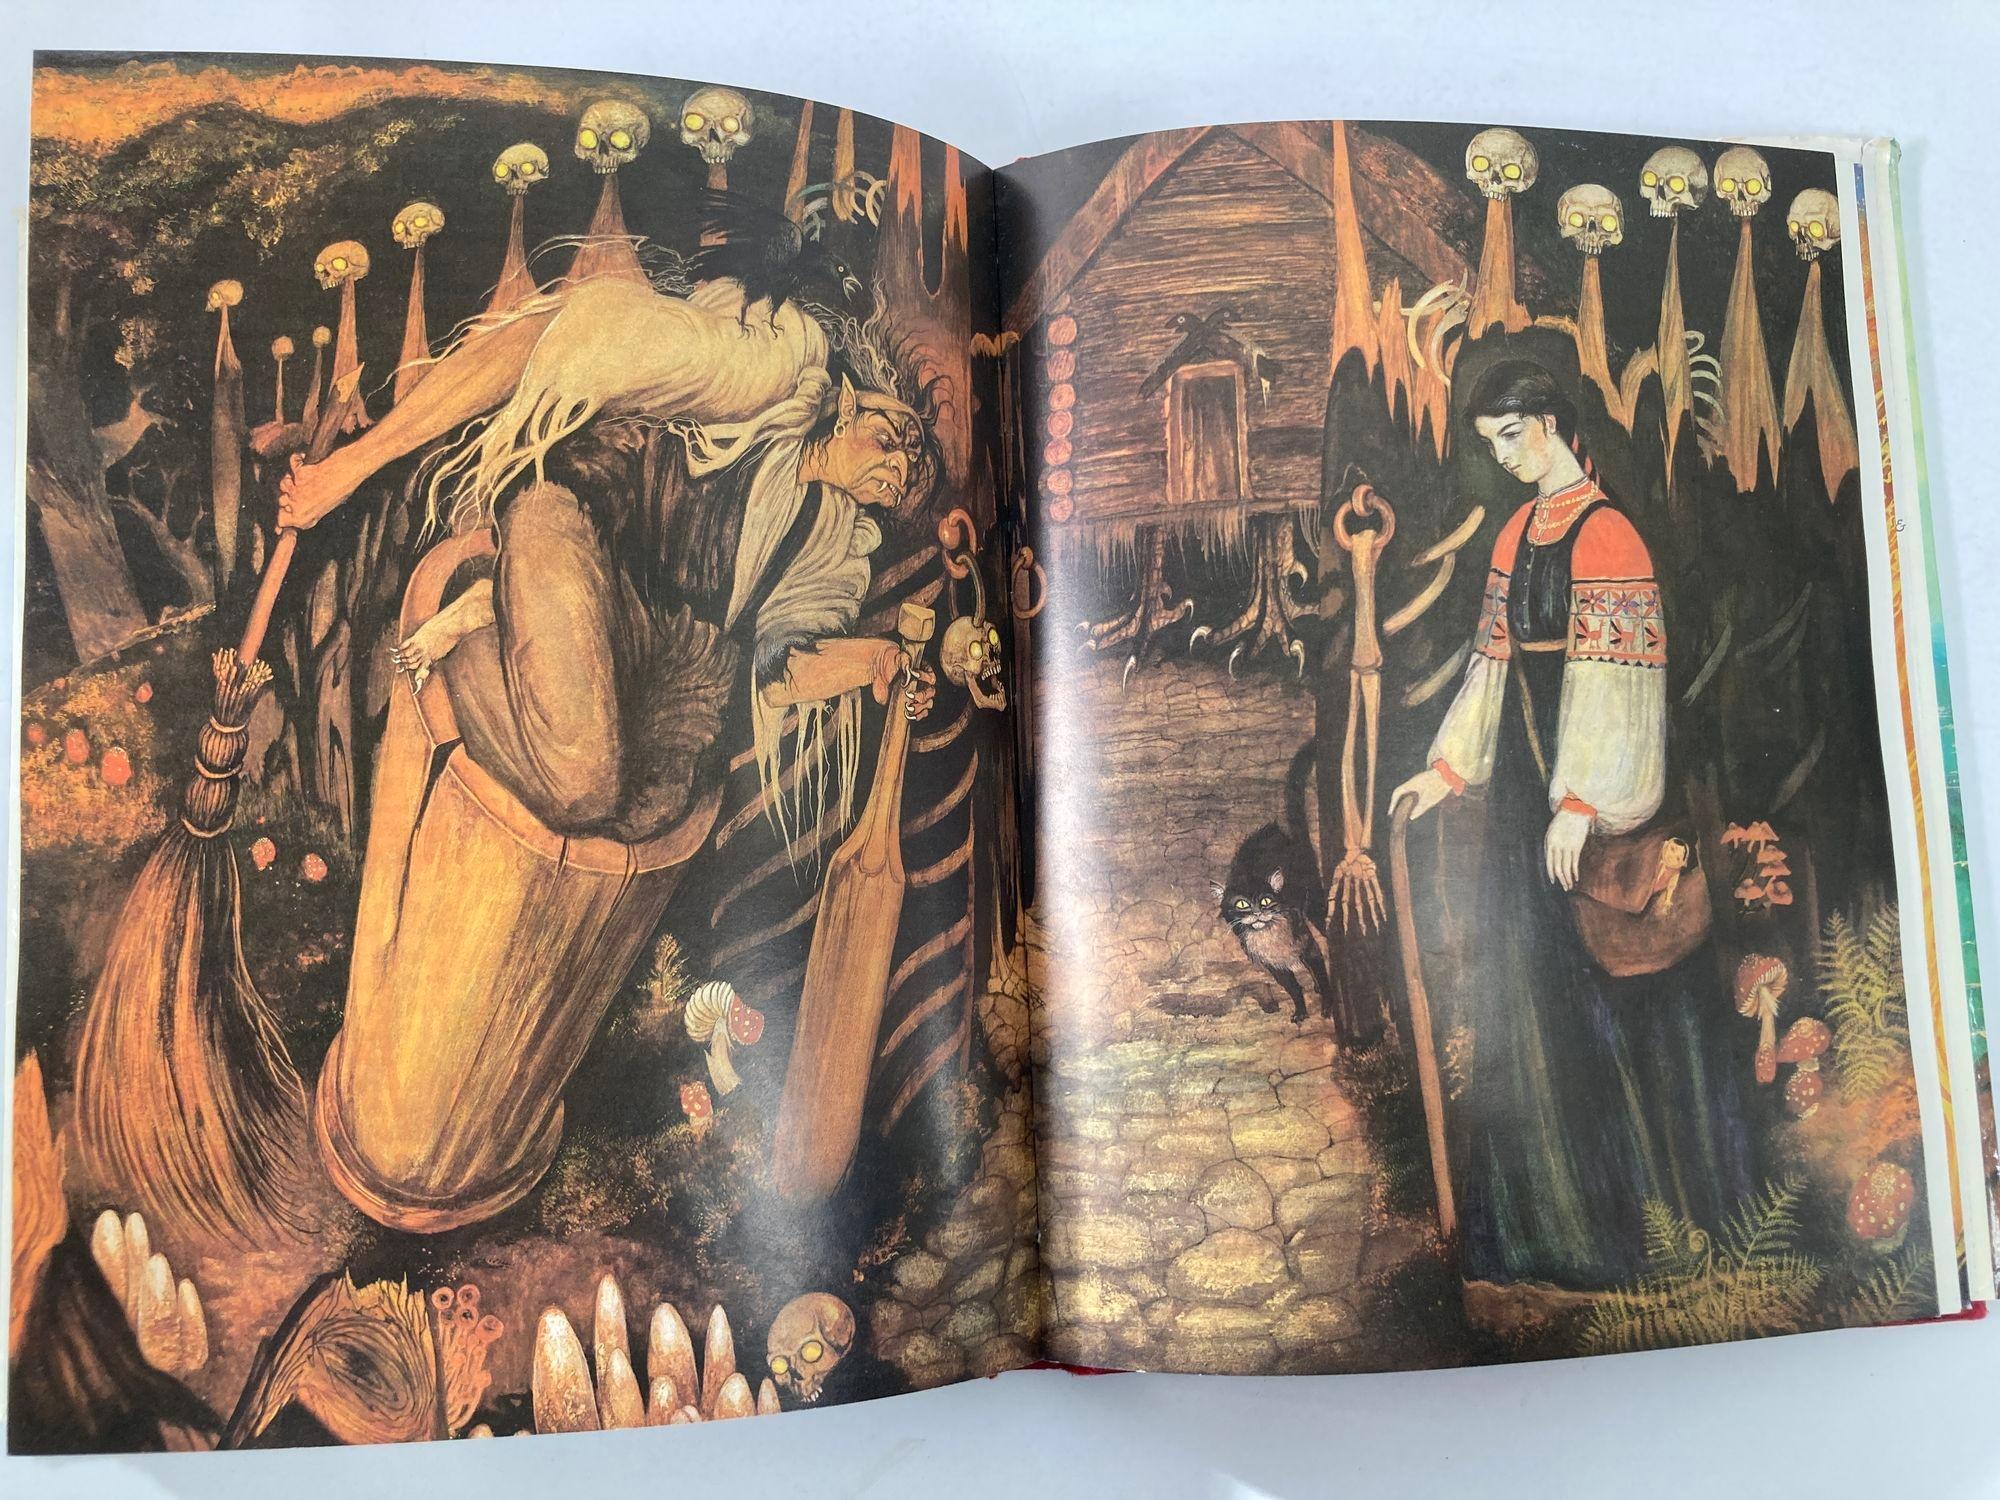 Heroes Monsters & Other Worlds from Russian Mythology Hardcover Book 1985 1st Ed For Sale 4